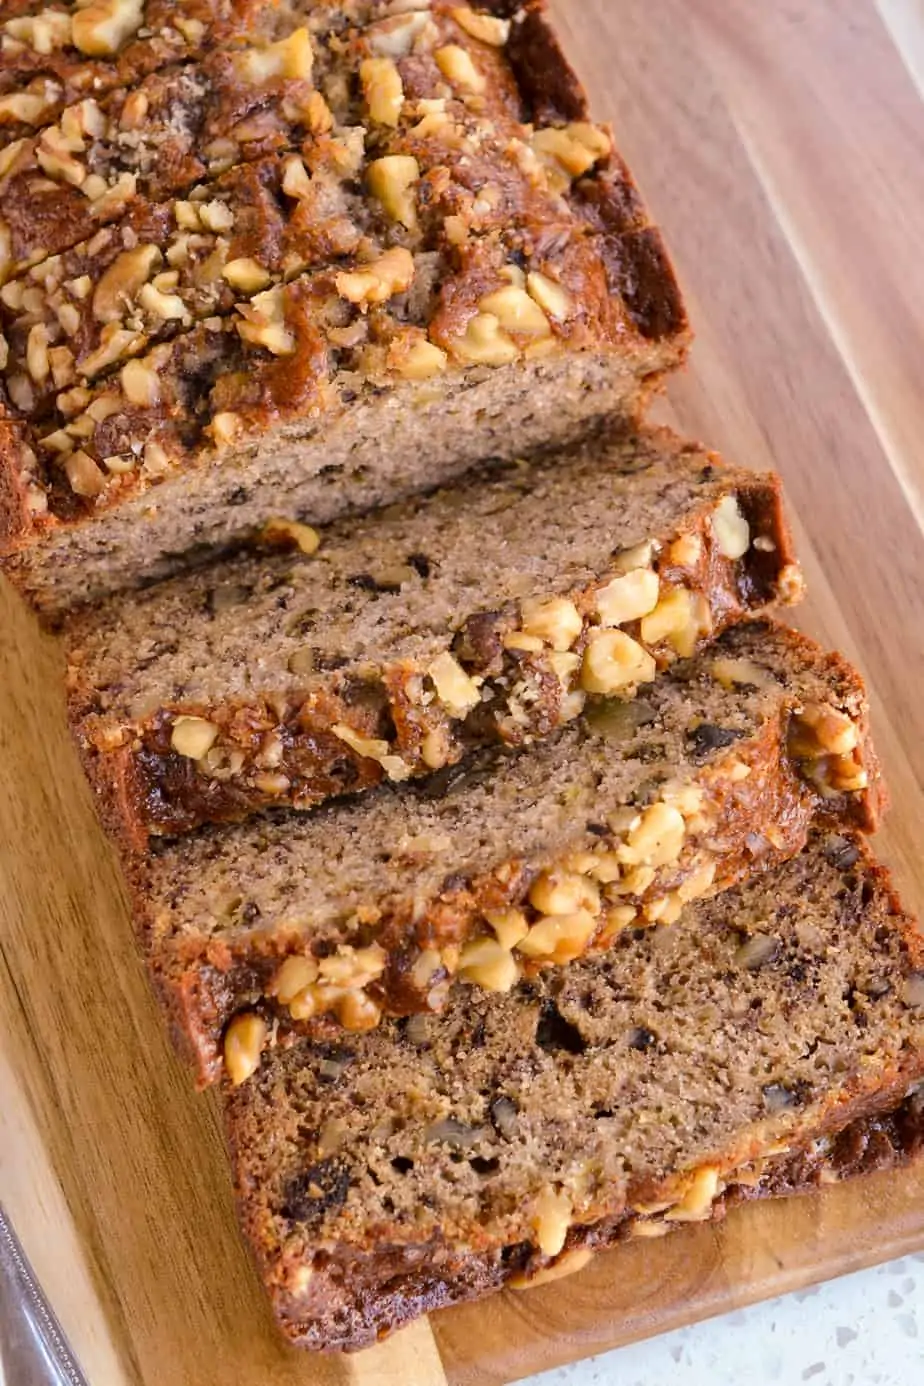 Slices of moist banana bread with walnuts